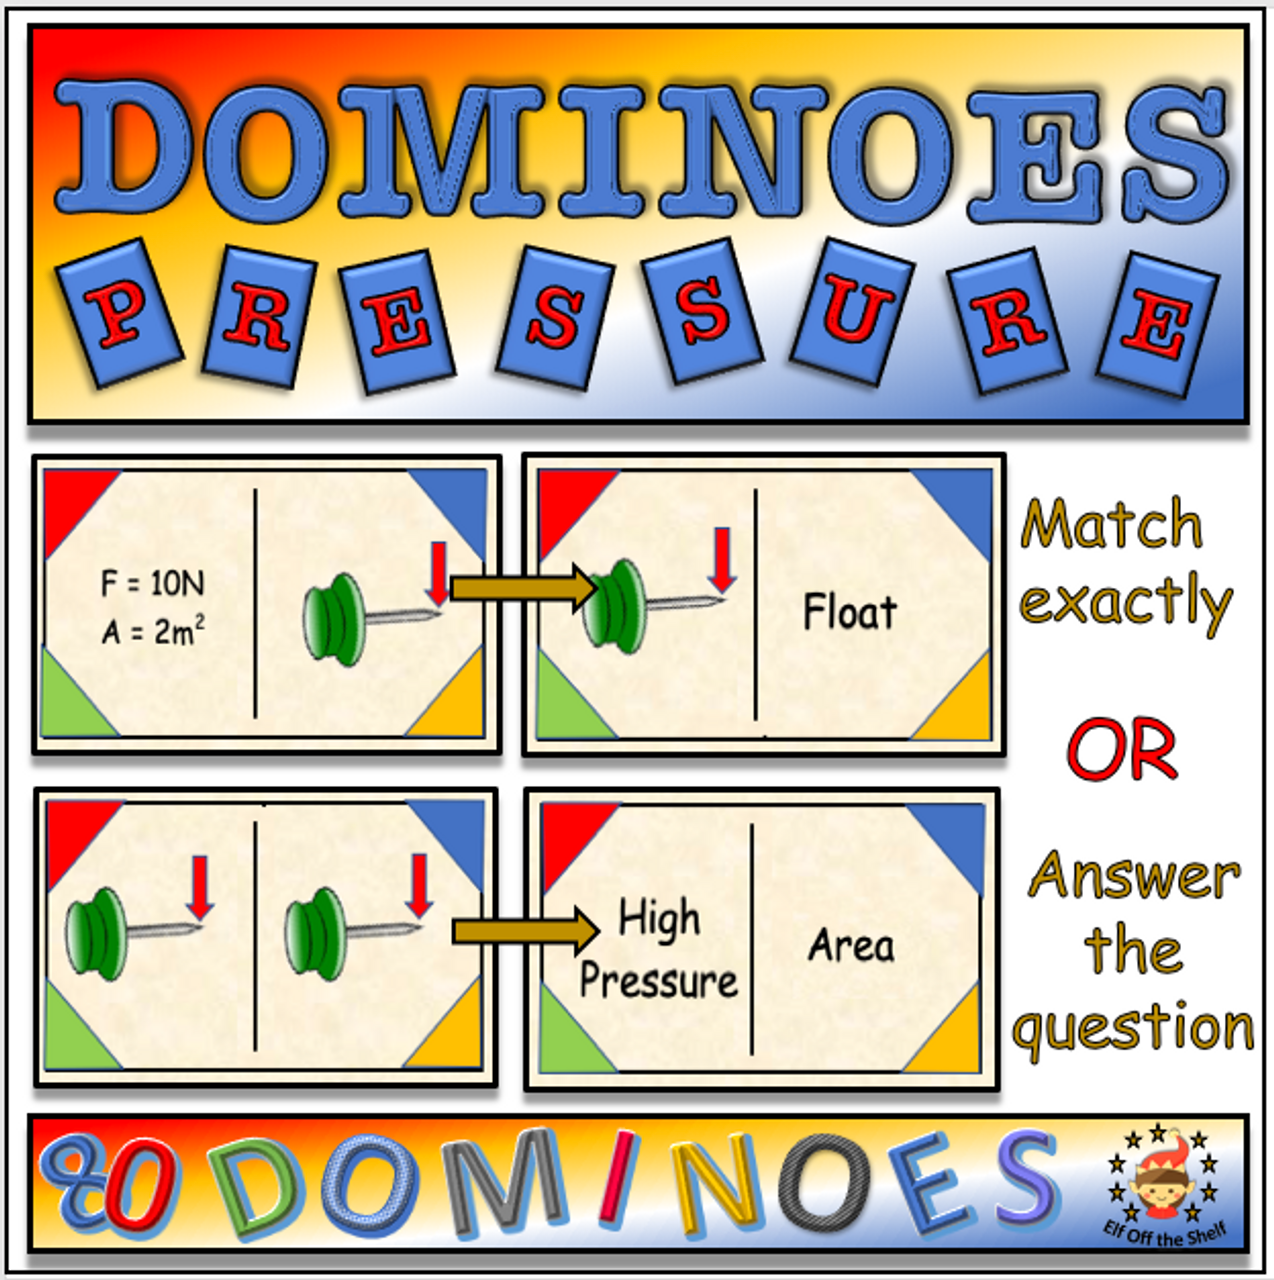 Forces - Pressure Dominoes for Middle School Science